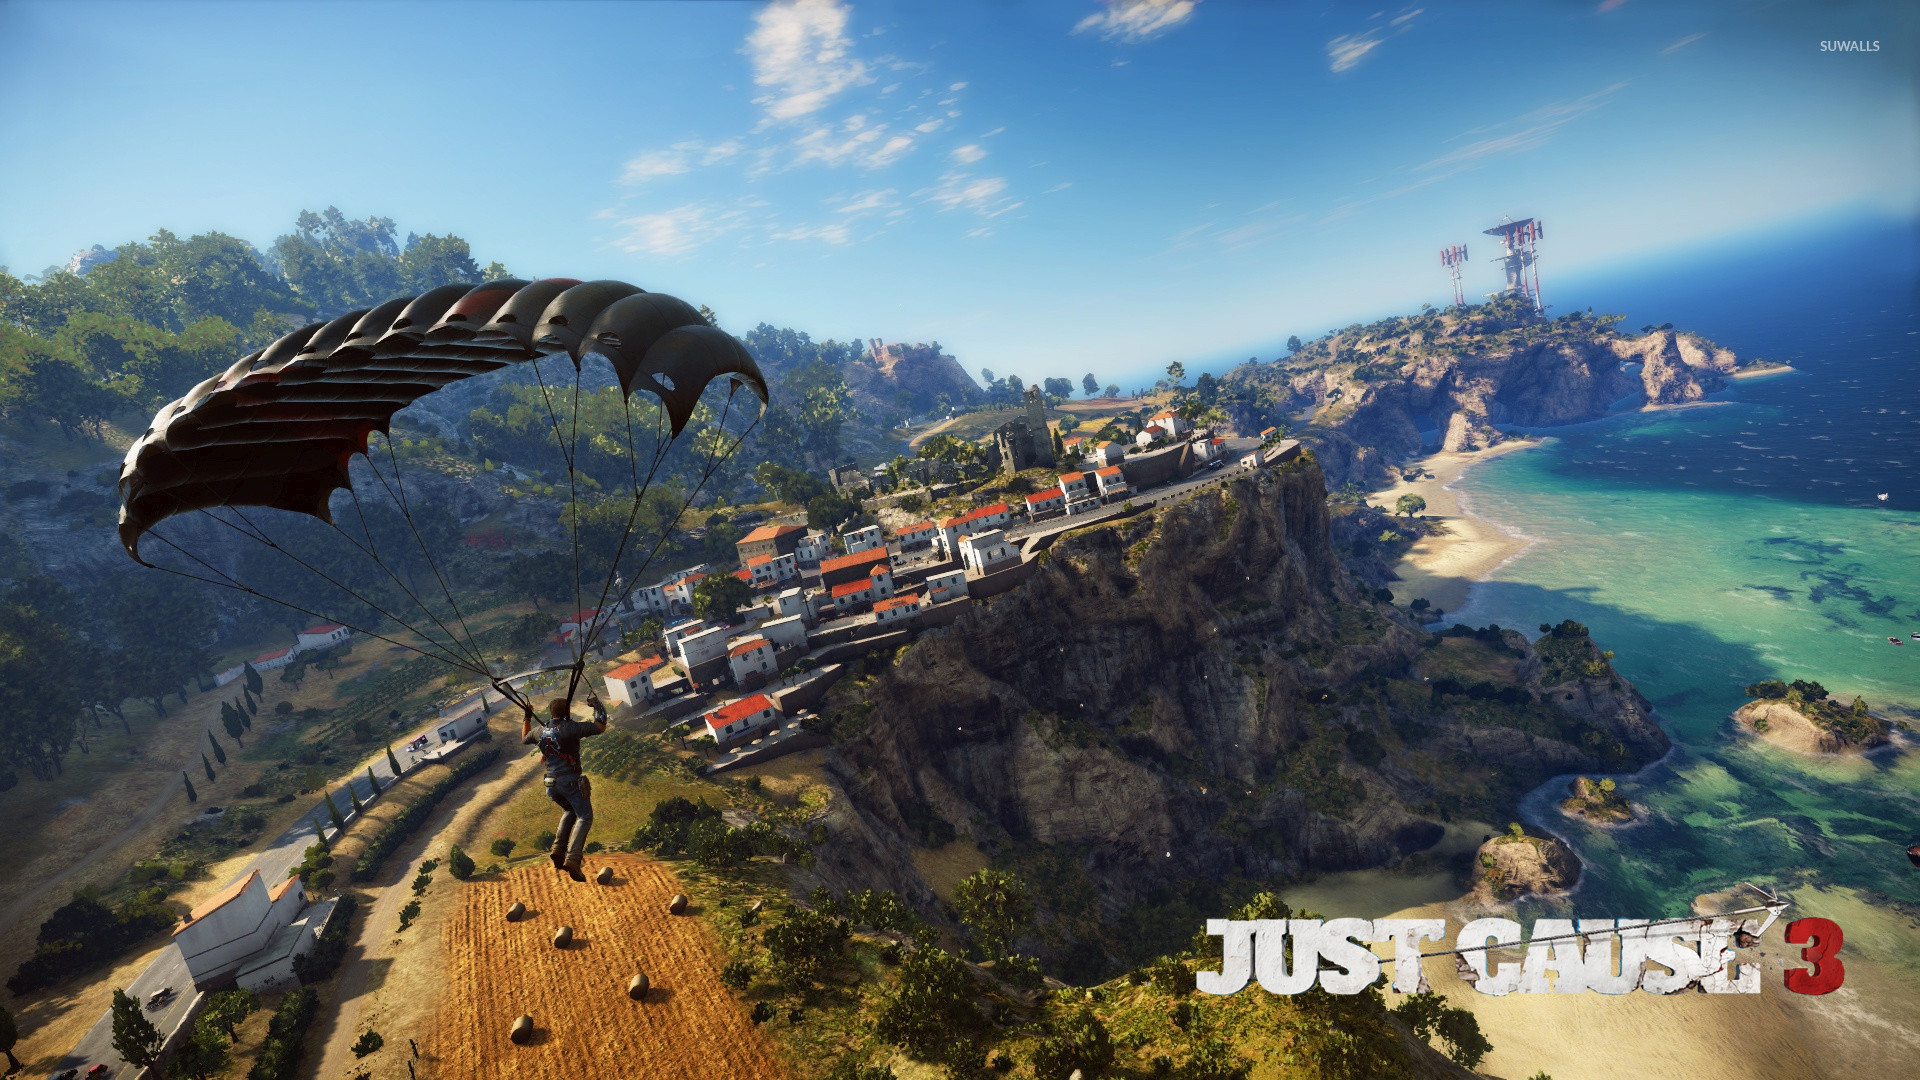 1920x1080 Rico Rodriguez parachuting over the coast - Just Cause 3 wallpaper